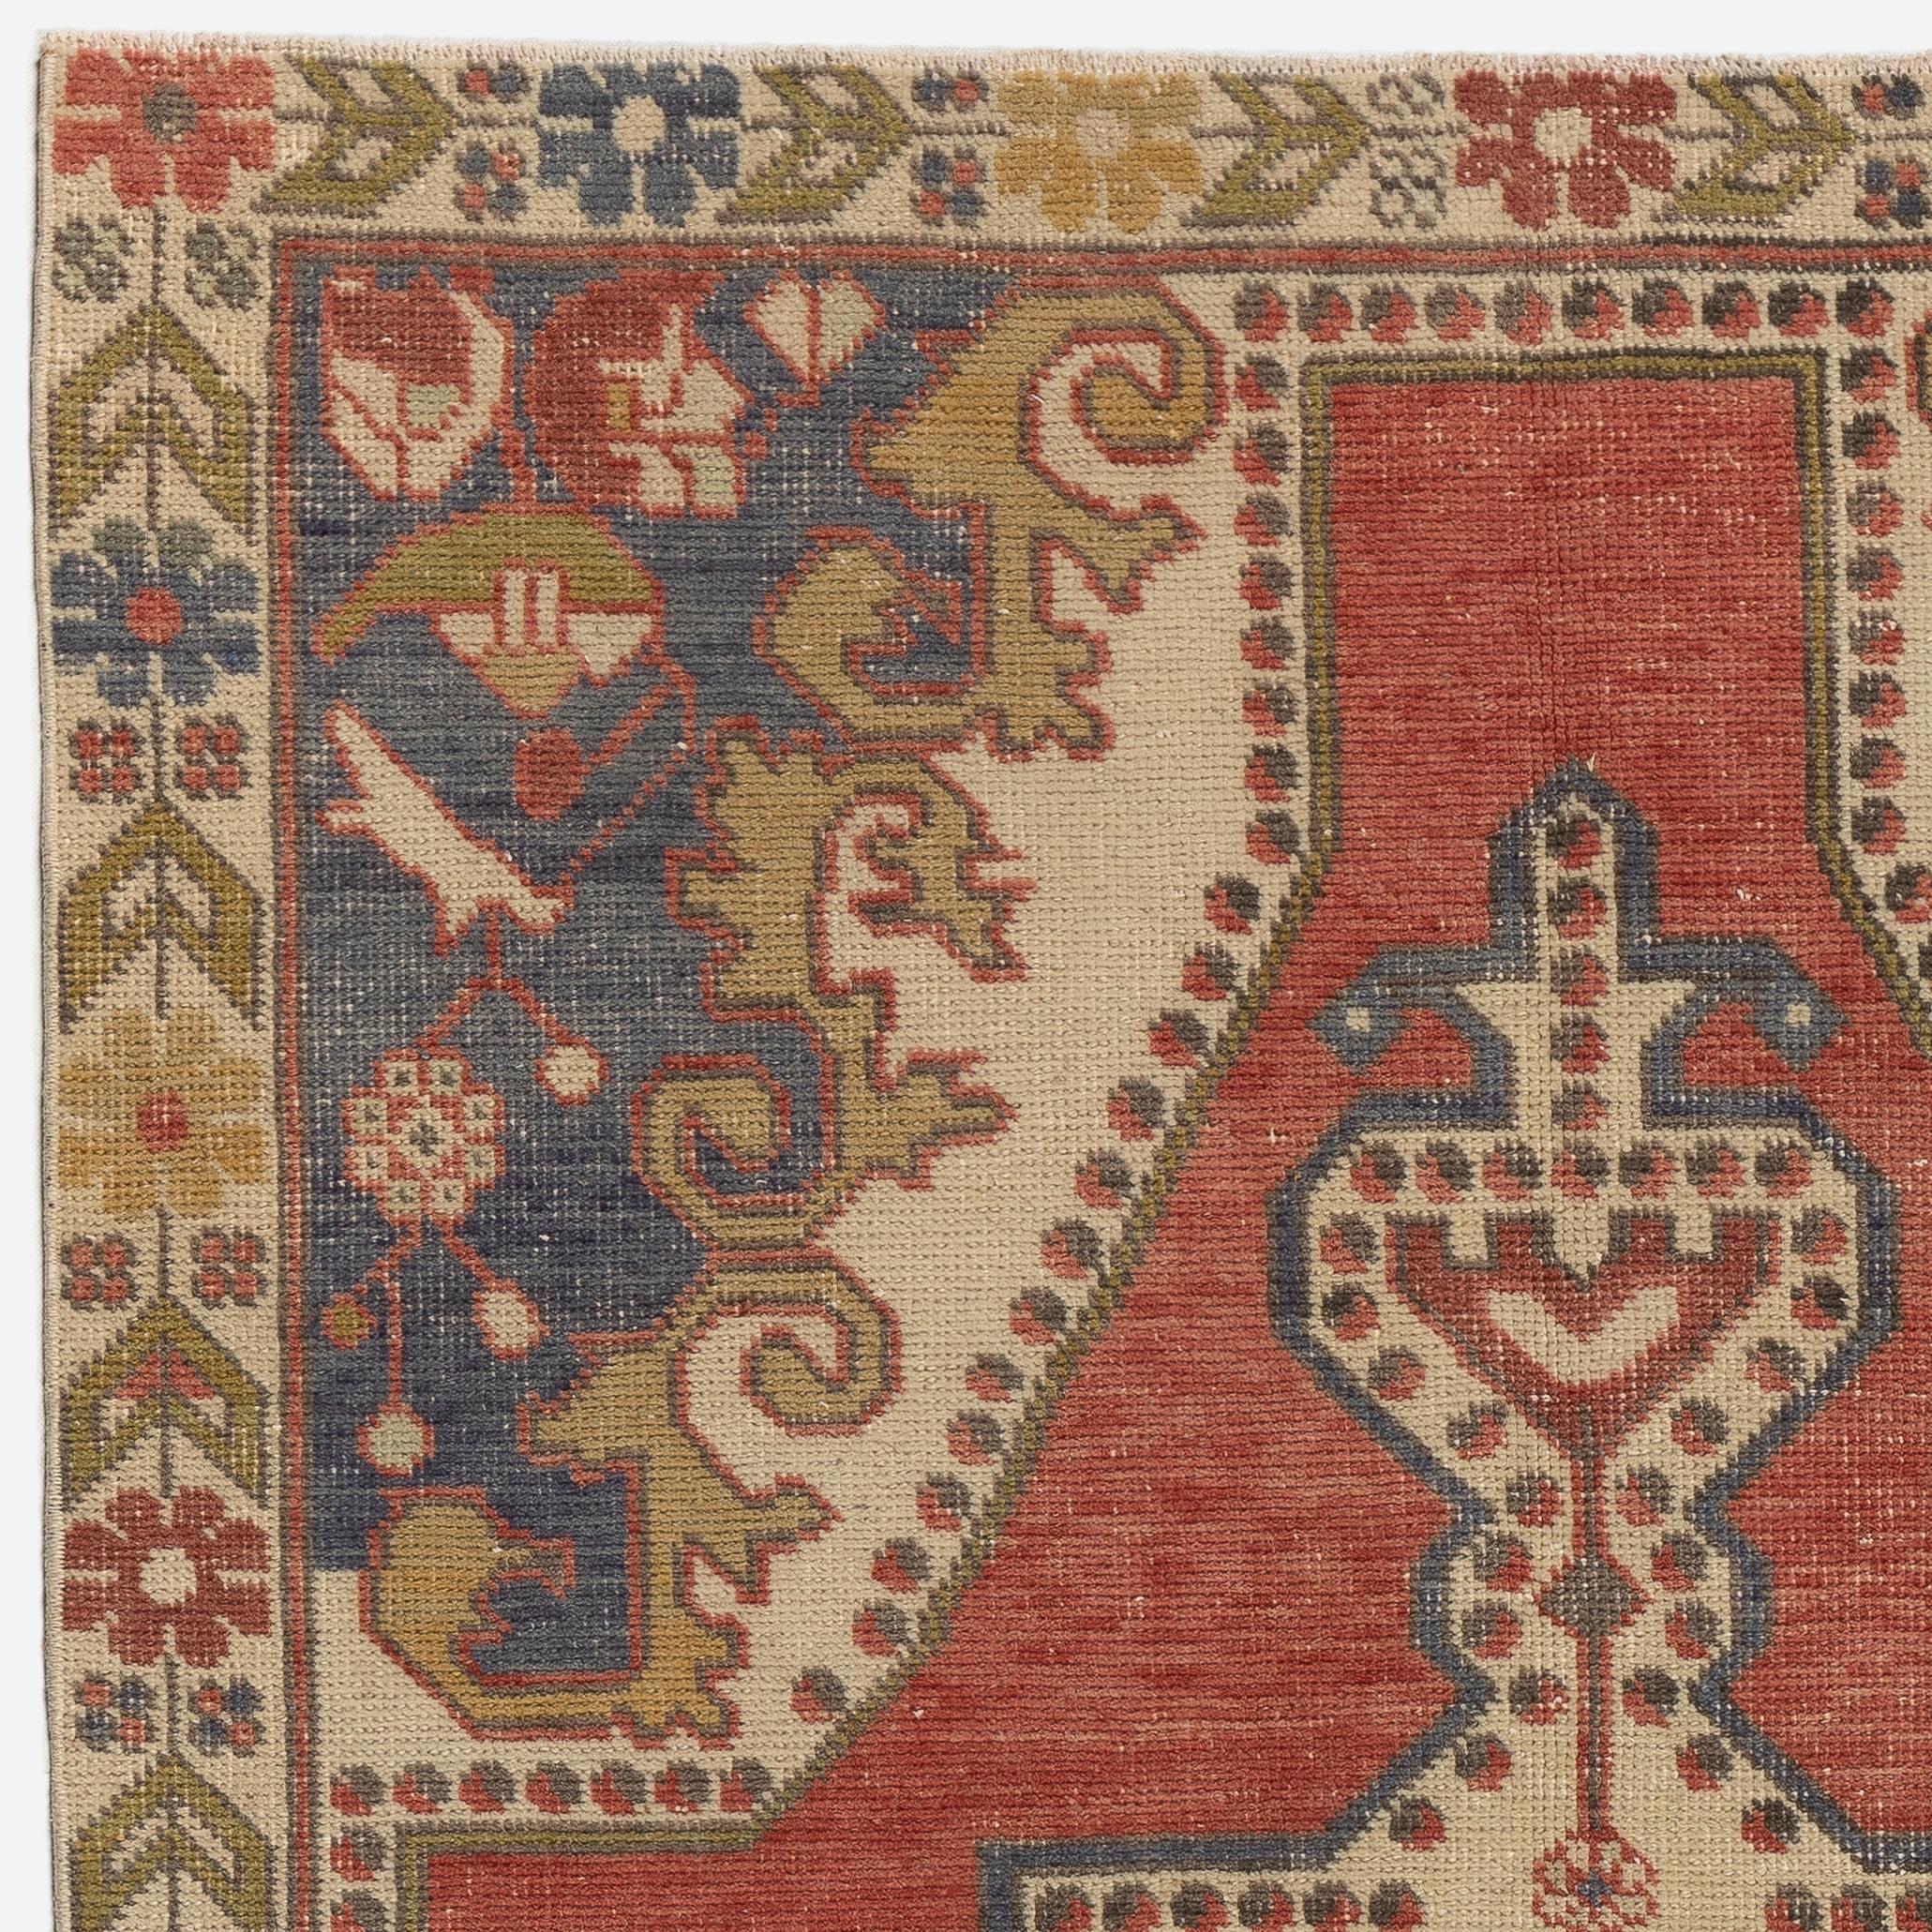 A vintage Turkish village rug with geometric medallion design. Size: 4.4x7.8 Ft.
The rug is hand-knotted with natural sheep's wool, has soft medium pile, in good condition and sturdy. Its soft and warm color palette has a vibrancy to it that could